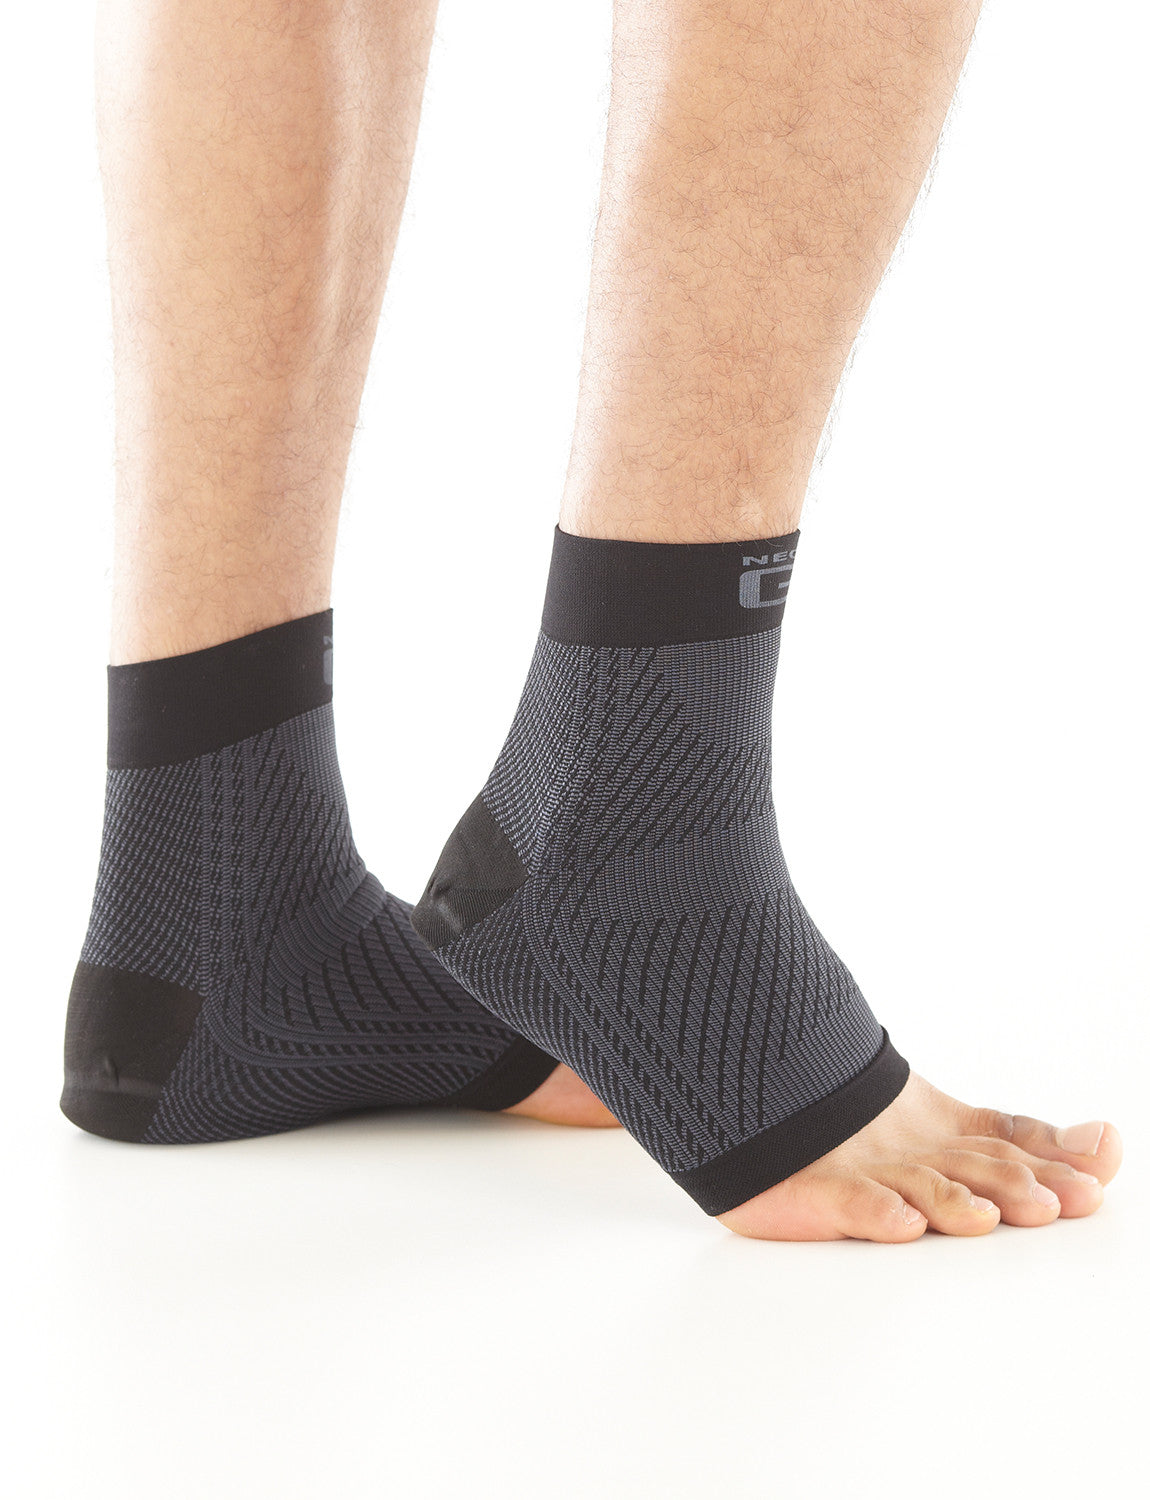 Plantar Fasciitis Supports for Everyday Use | Neo G UK